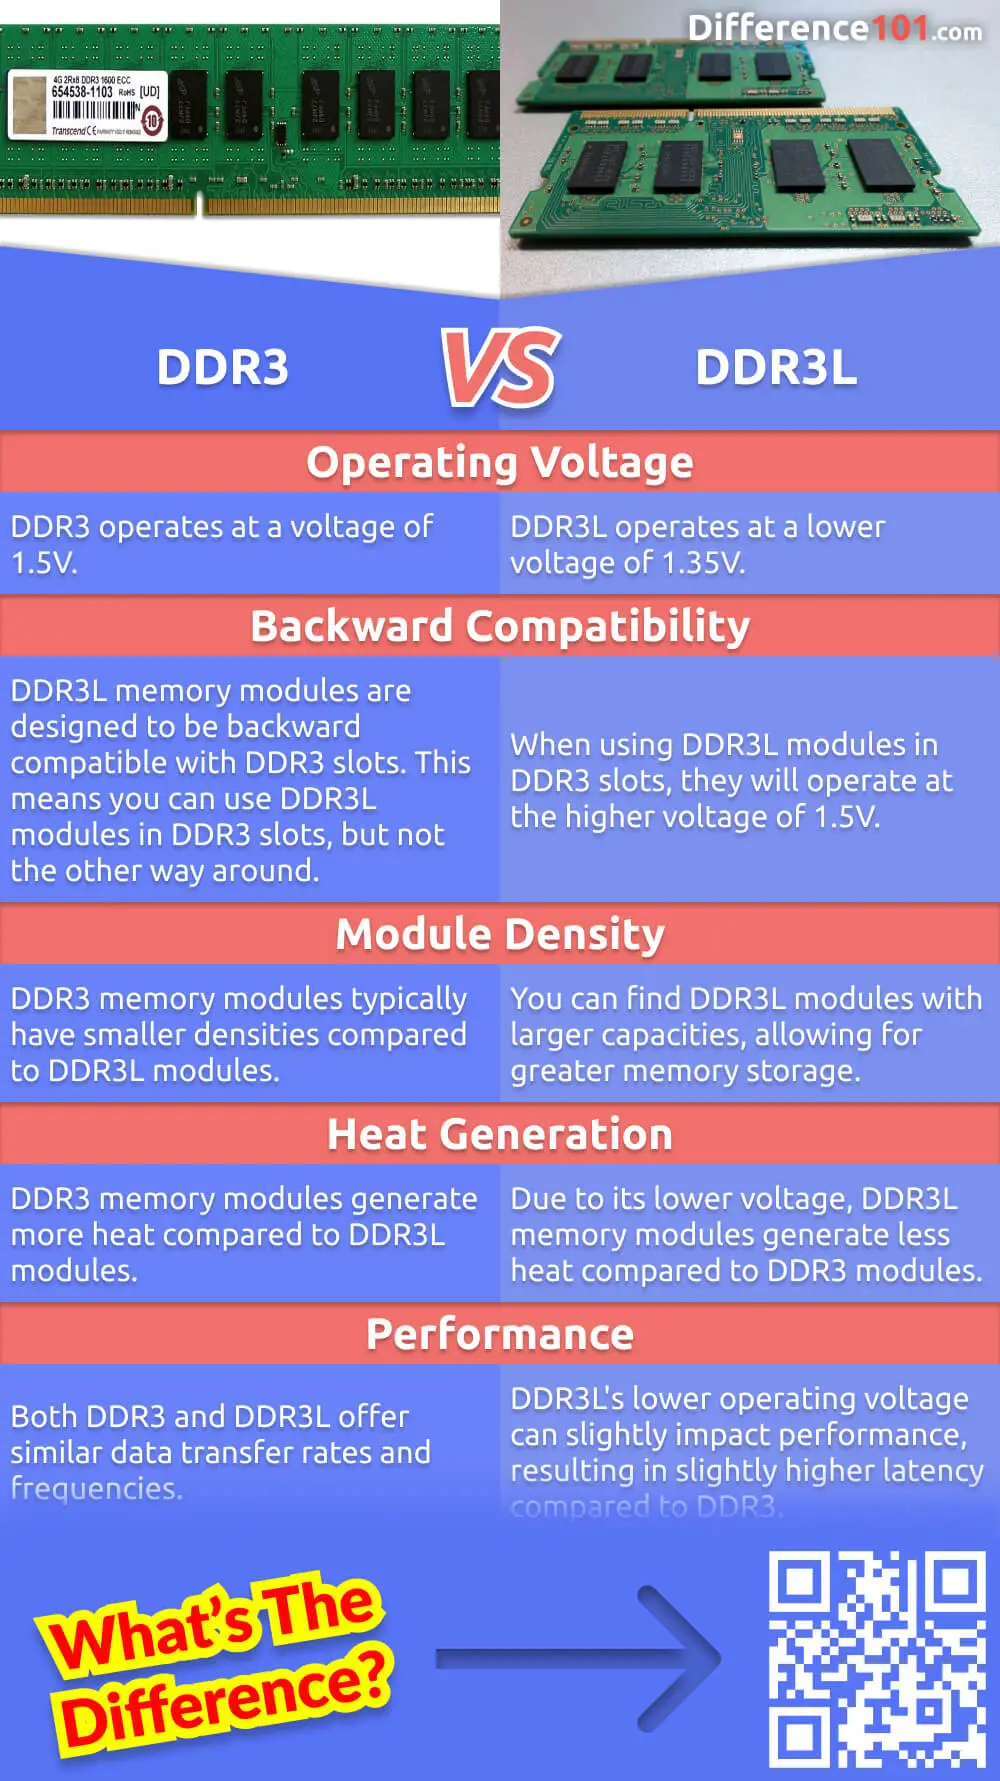 Are you looking for an explanation of the difference between DDR3 and DDR3L? This article provides a detailed comparison of the two types of RAM, including their speed, capacity, and power consumption.